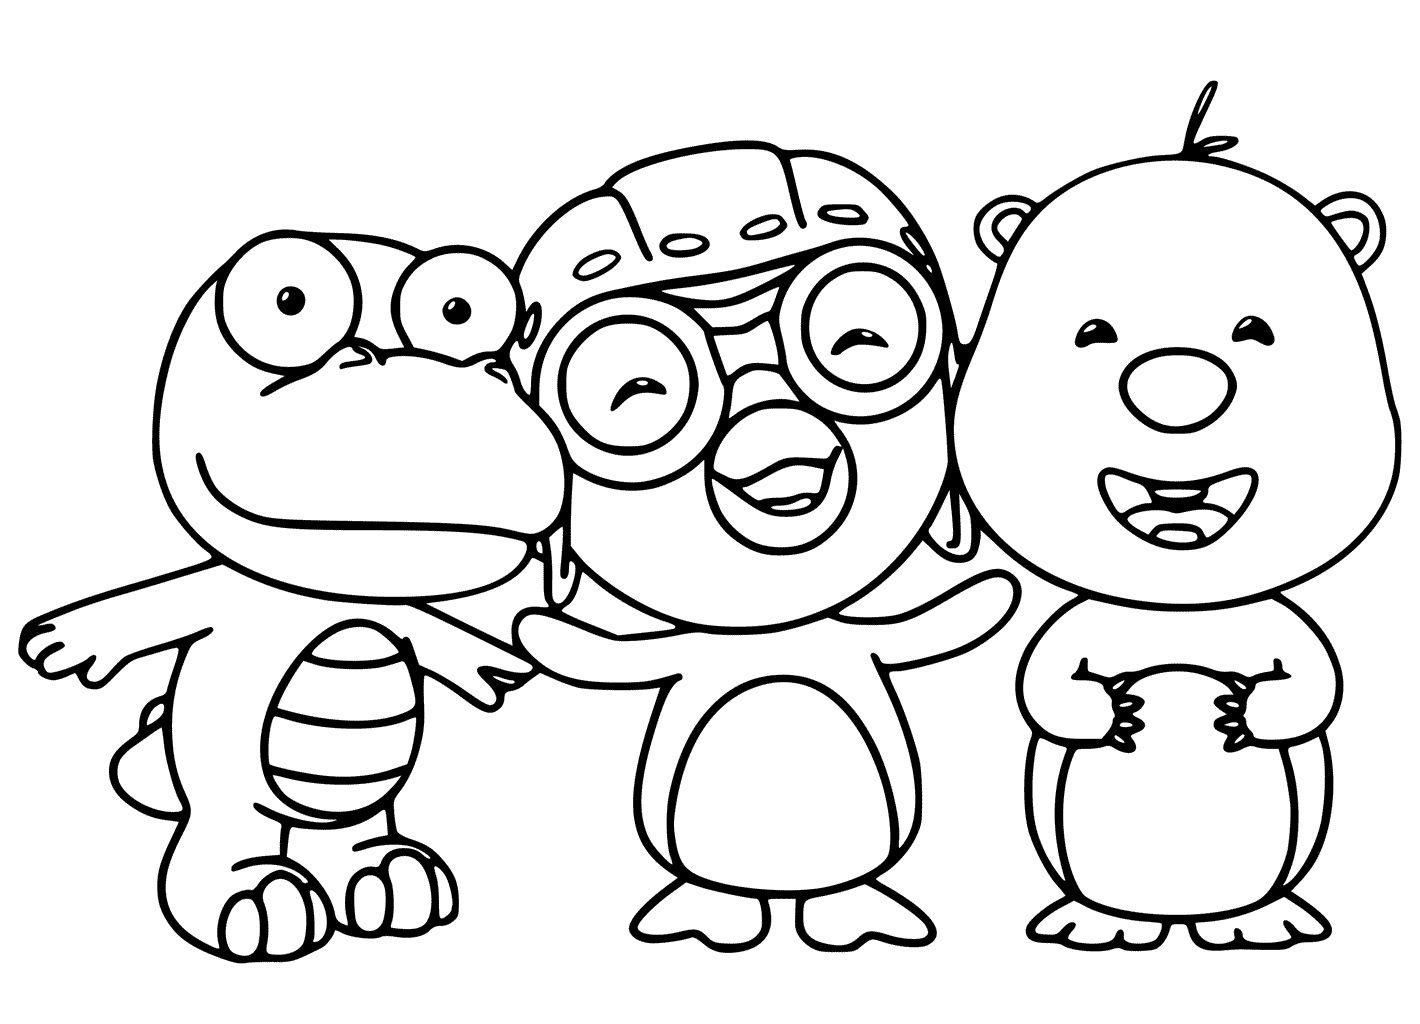 Pororo and friends Coloring Pages